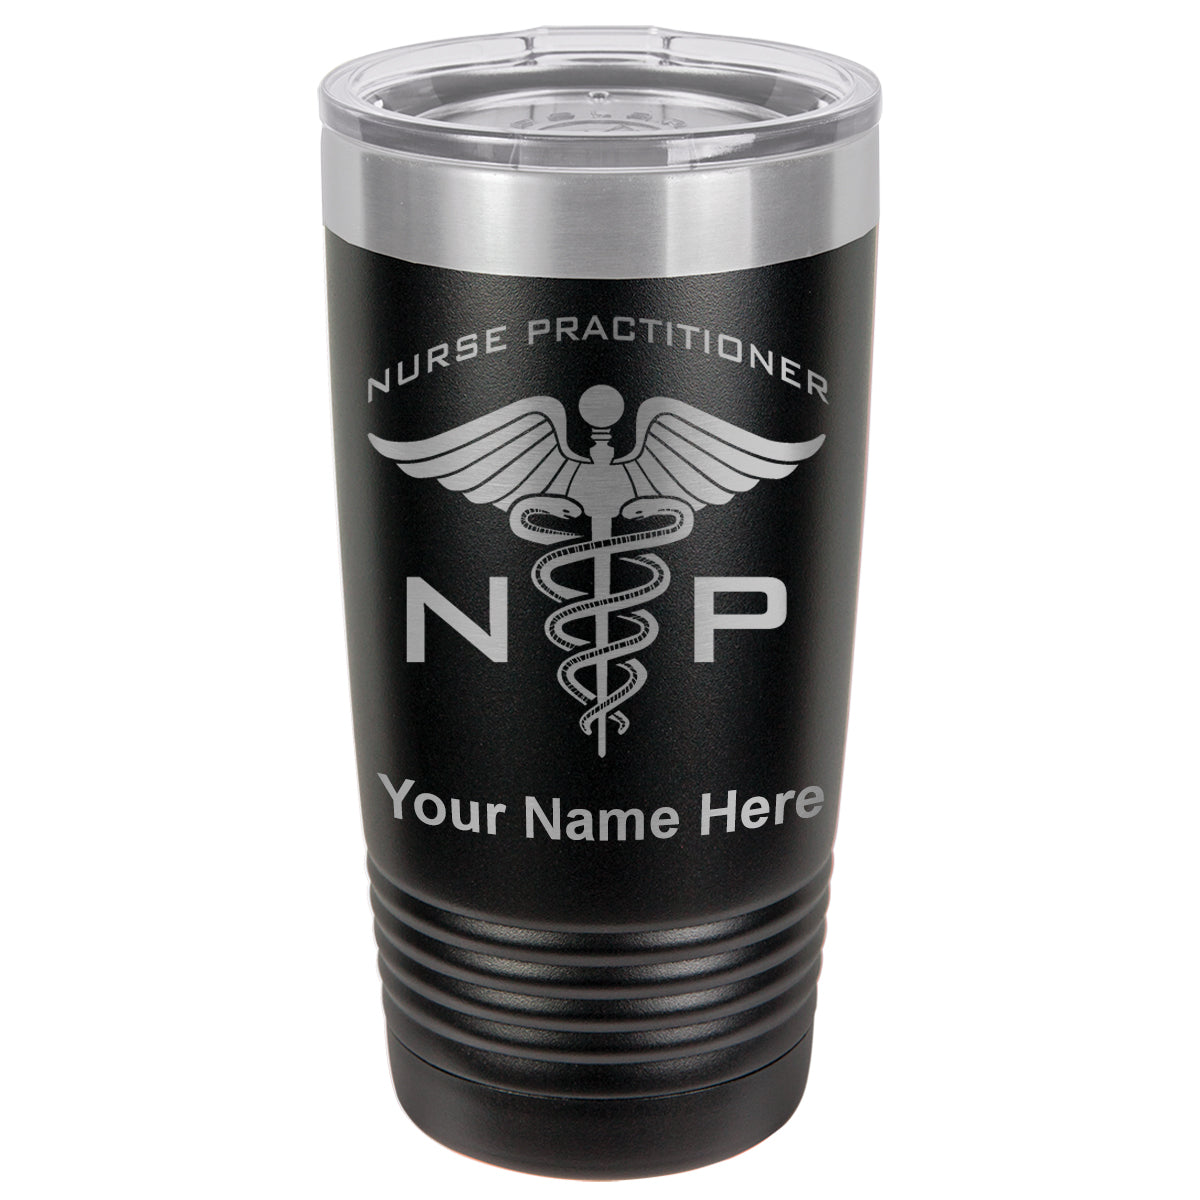 20oz Vacuum Insulated Tumbler Mug, NP Nurse Practitioner, Personalized Engraving Included